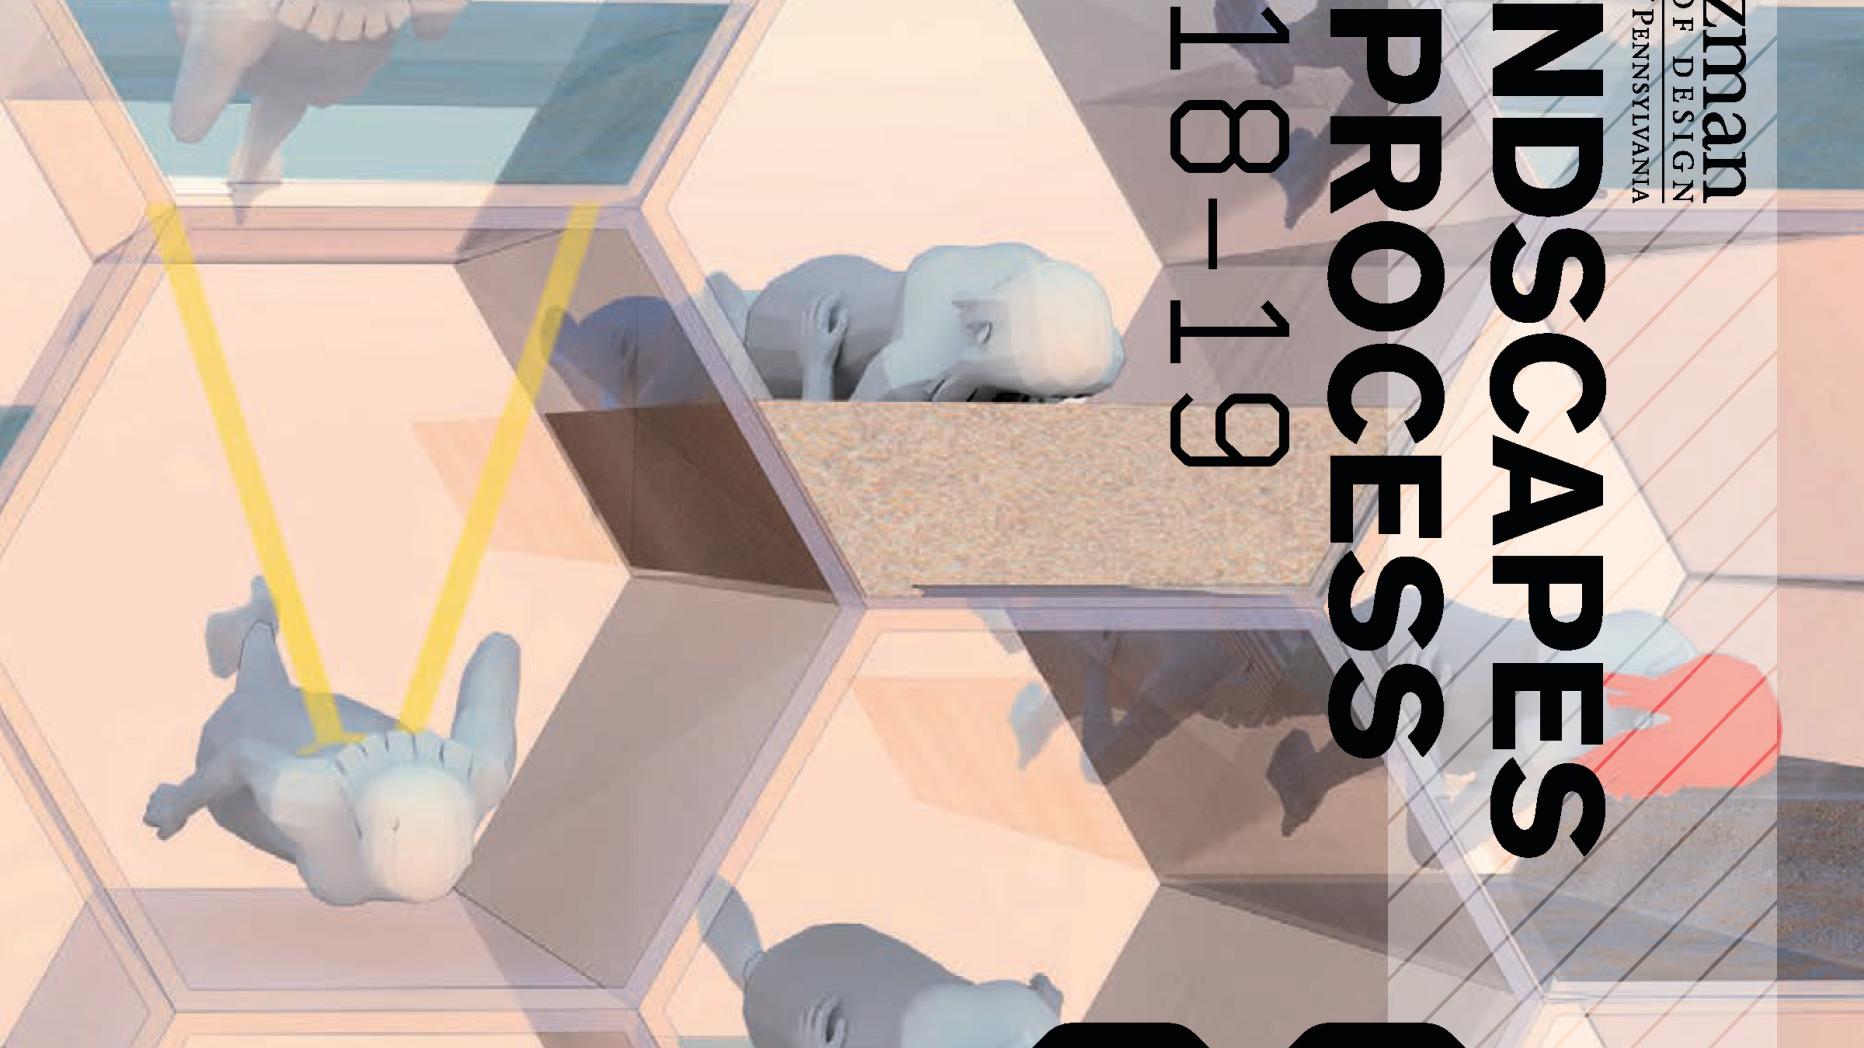 Cover for publication, "Landscapes in Process" edition 23, 2018-19